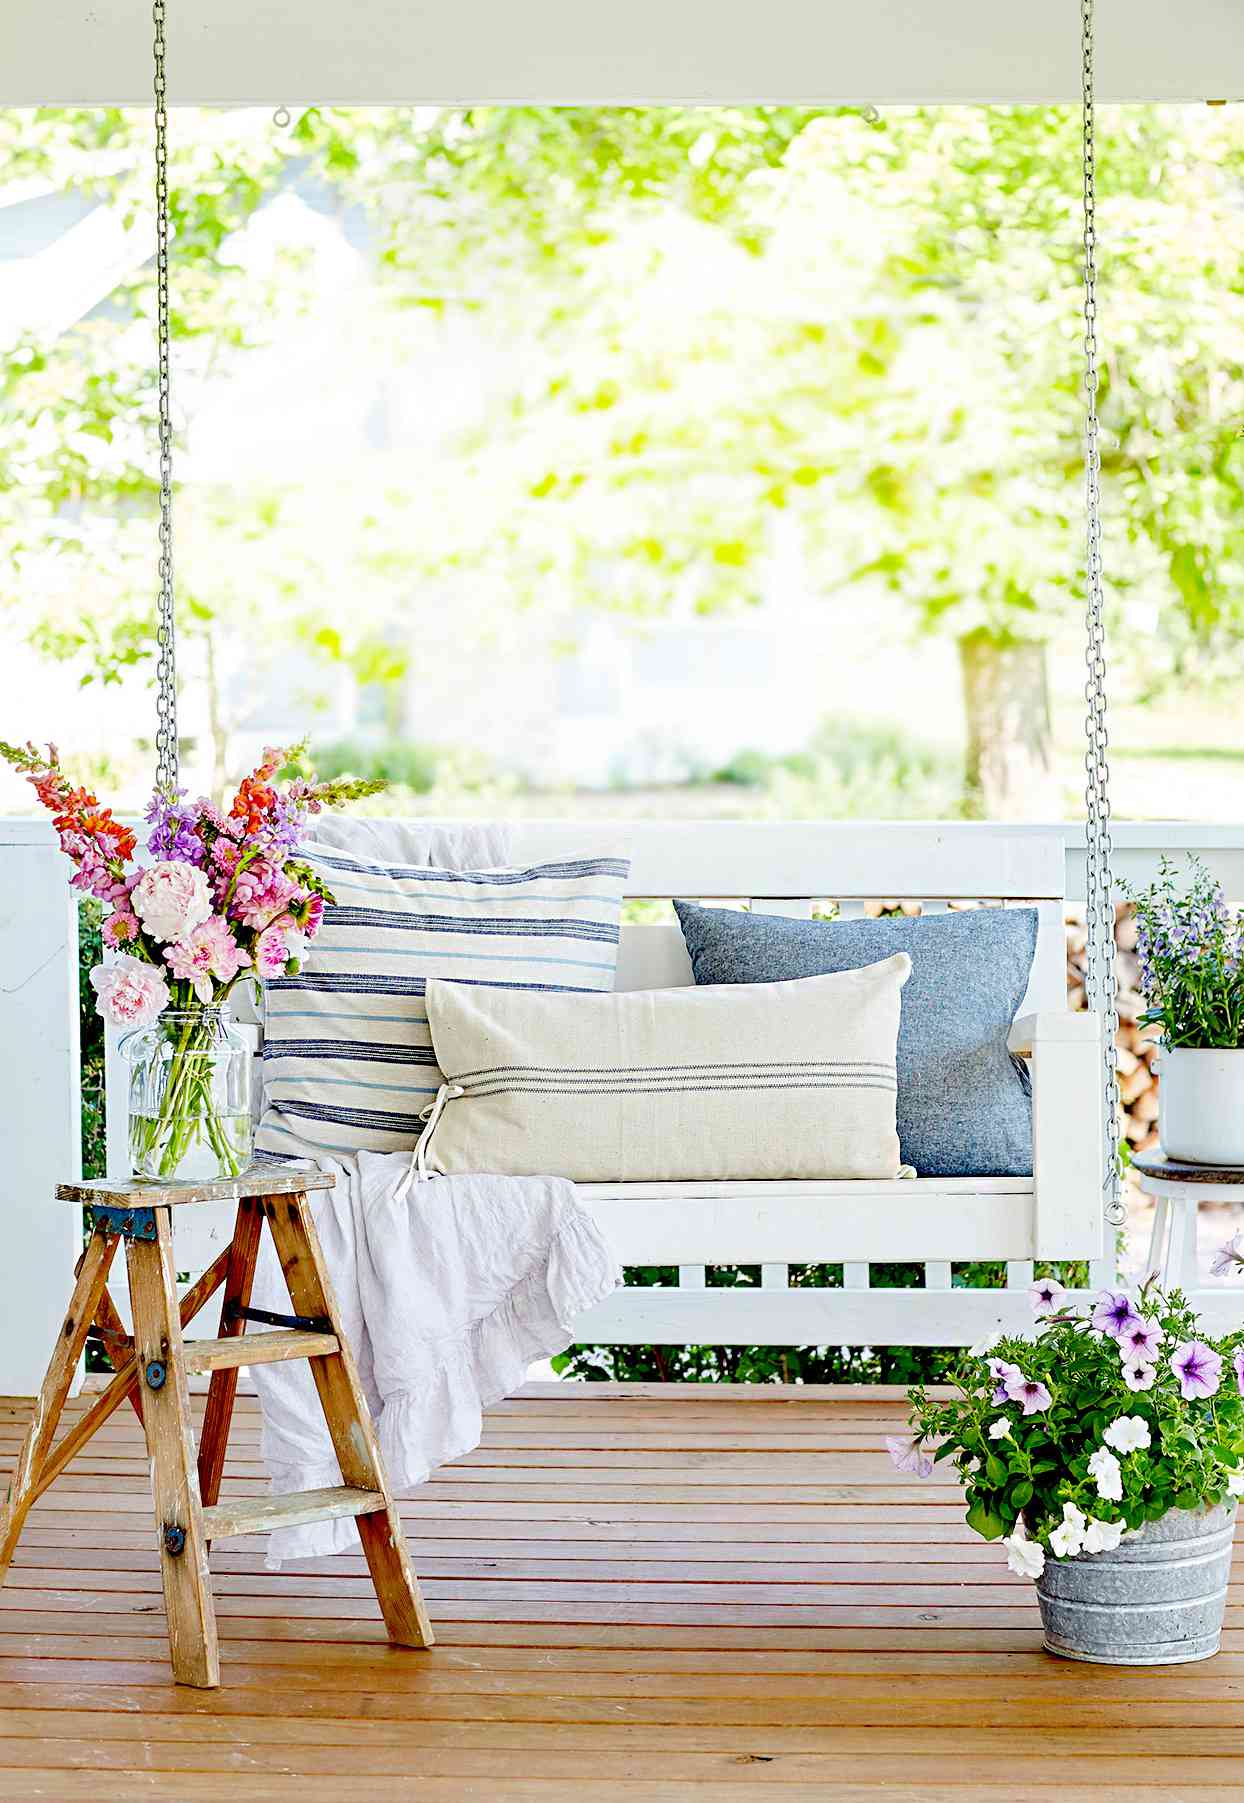 Porch swing with pillows and flowers